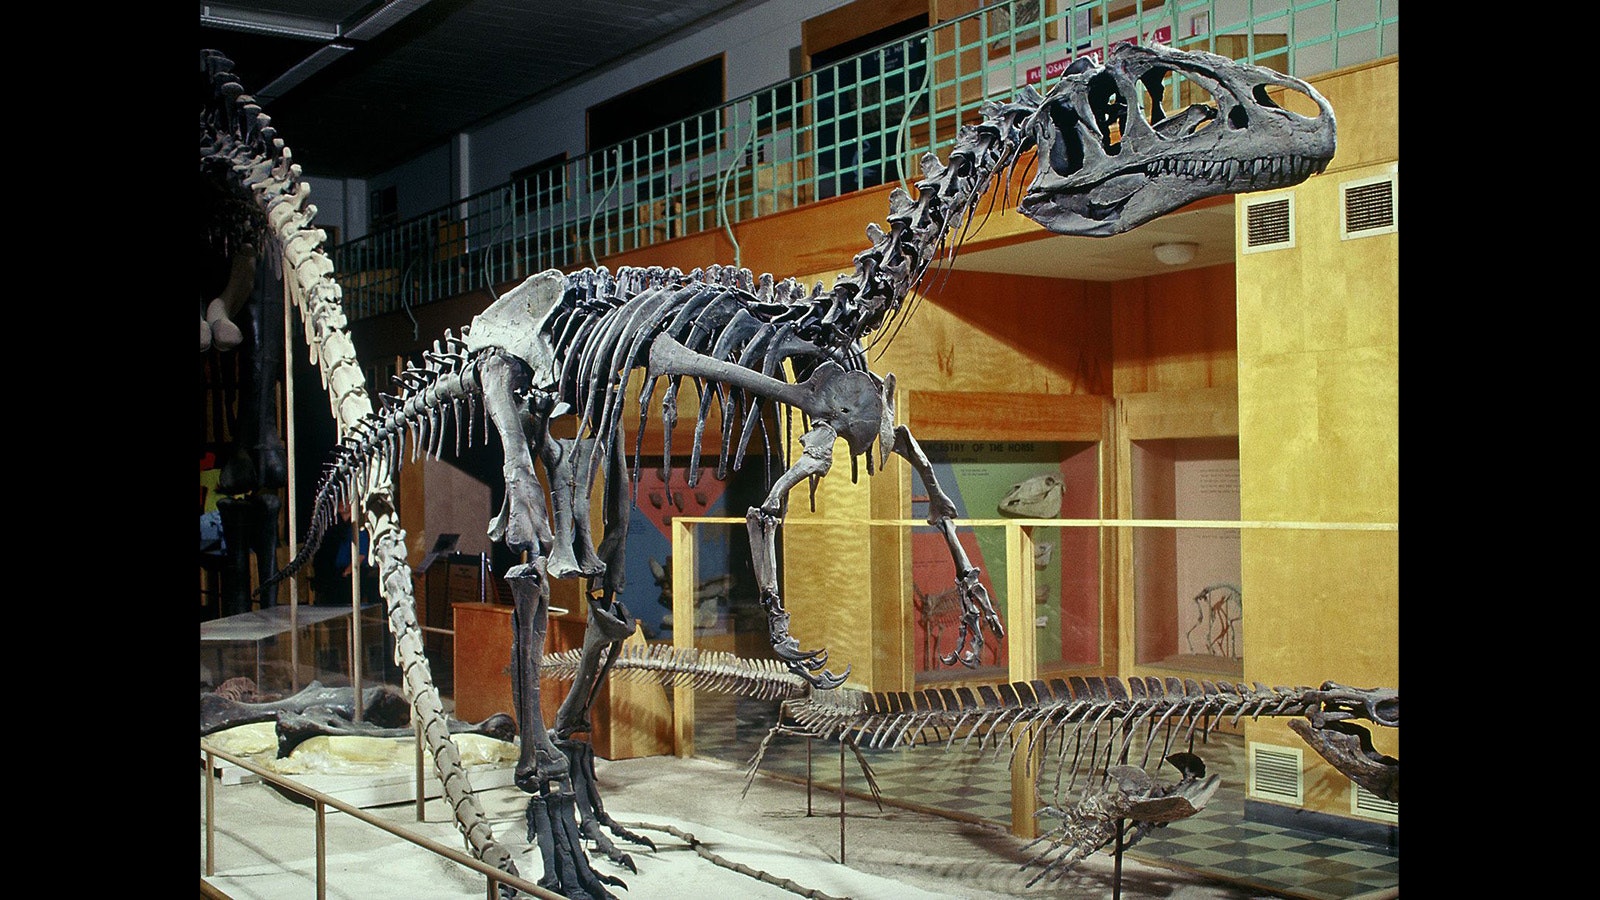 "Big Al" is a 93% complete Allosaurus skeleton found near Shell, Wyoming, more than 30 years ago.